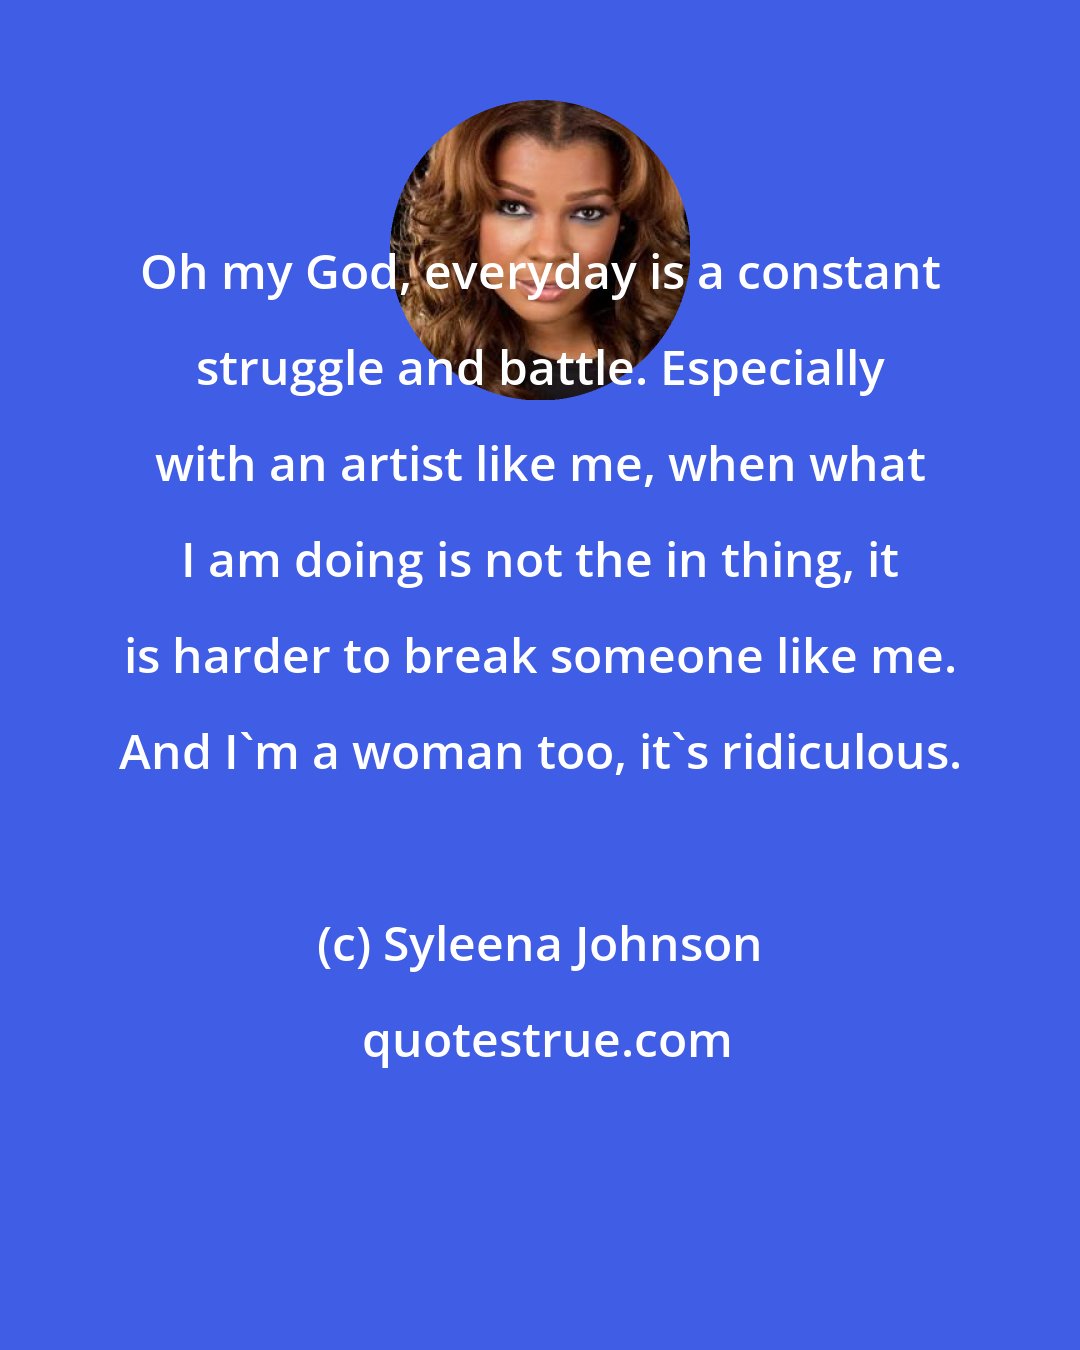 Syleena Johnson: Oh my God, everyday is a constant struggle and battle. Especially with an artist like me, when what I am doing is not the in thing, it is harder to break someone like me. And I'm a woman too, it's ridiculous.